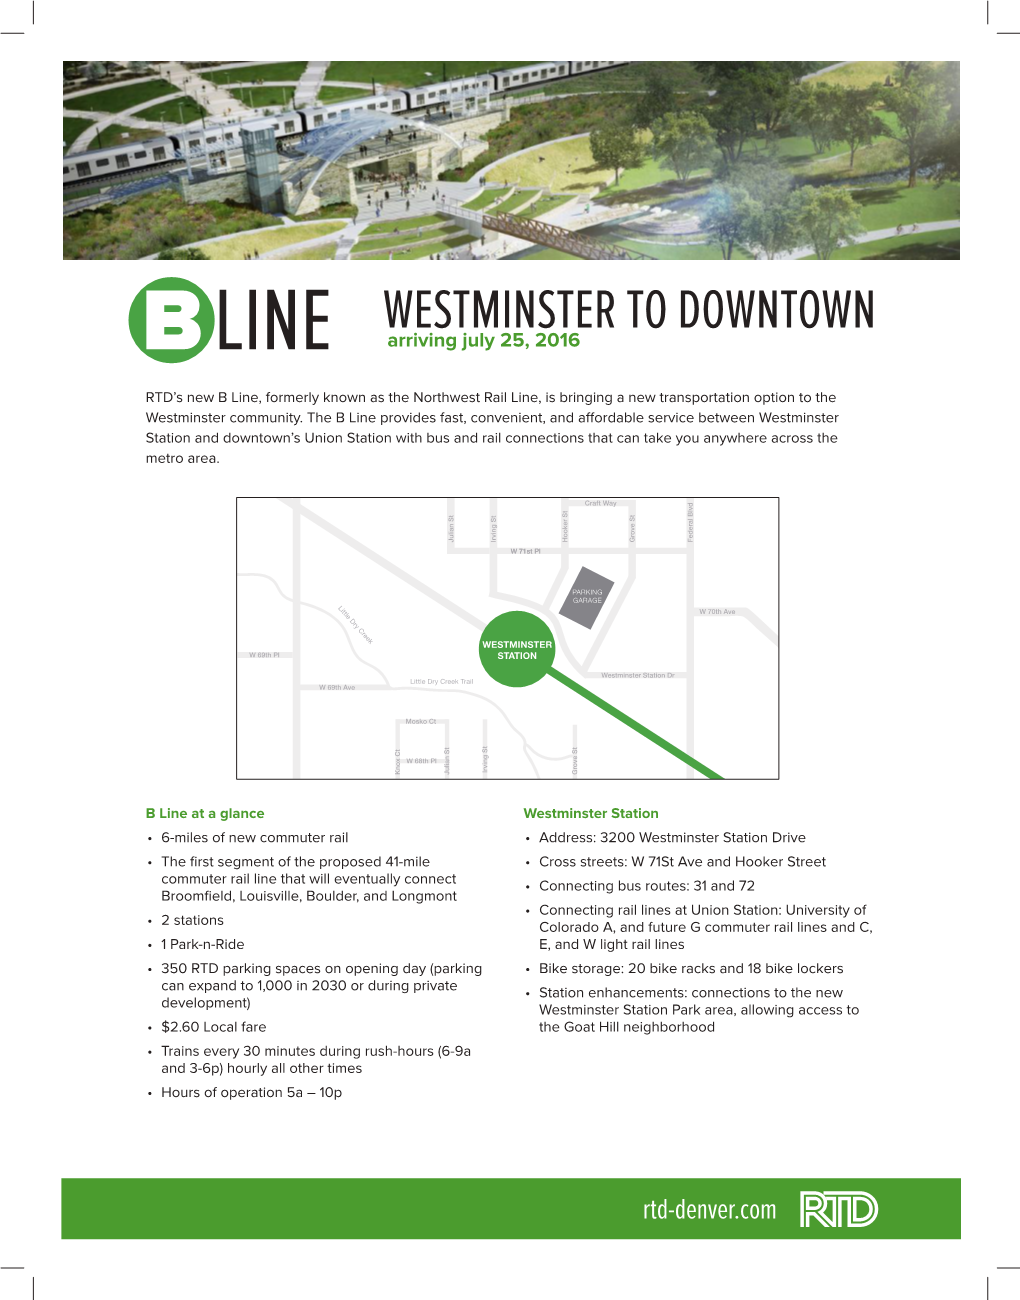 B Line, Formerly Known As the Northwest Rail Line, Is Bringing a New Transportation Option to the W 72Nd Ave W 72Nd Ave Westminster Community